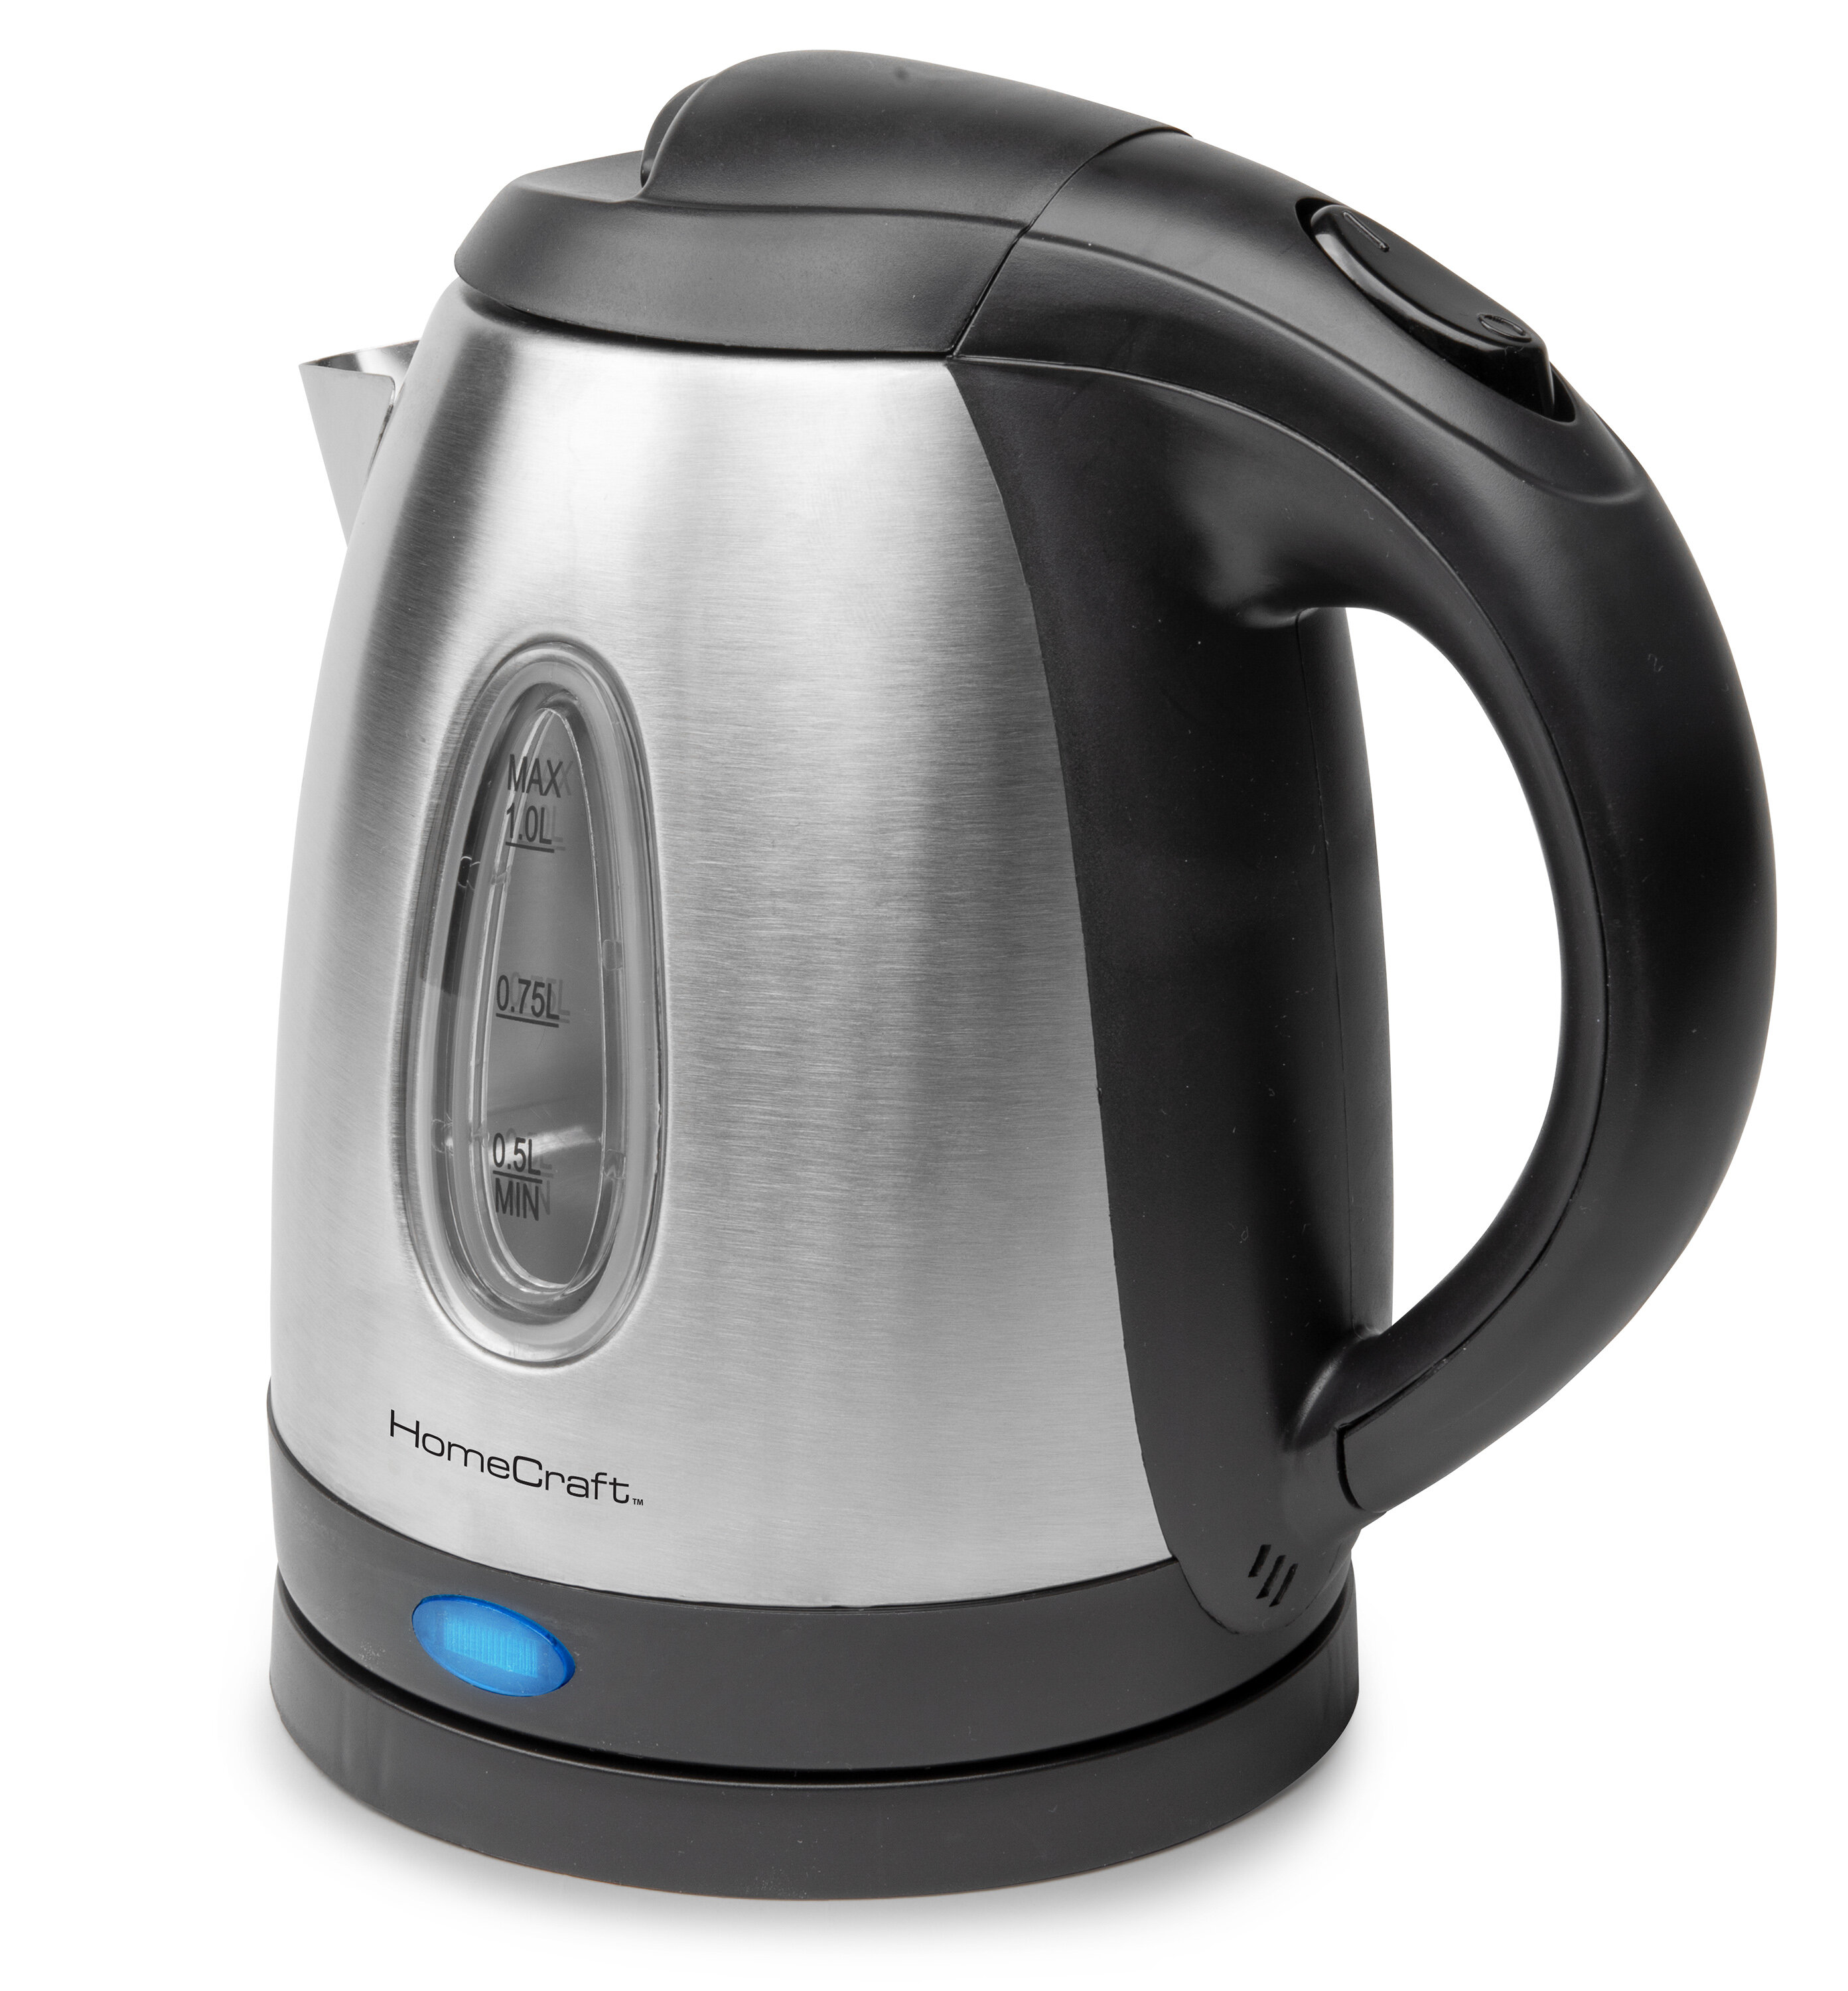  Bodum Ibis Stainless Steel Electric Water Kettle, 51 Ounce,  Matte Chrome: Home & Kitchen